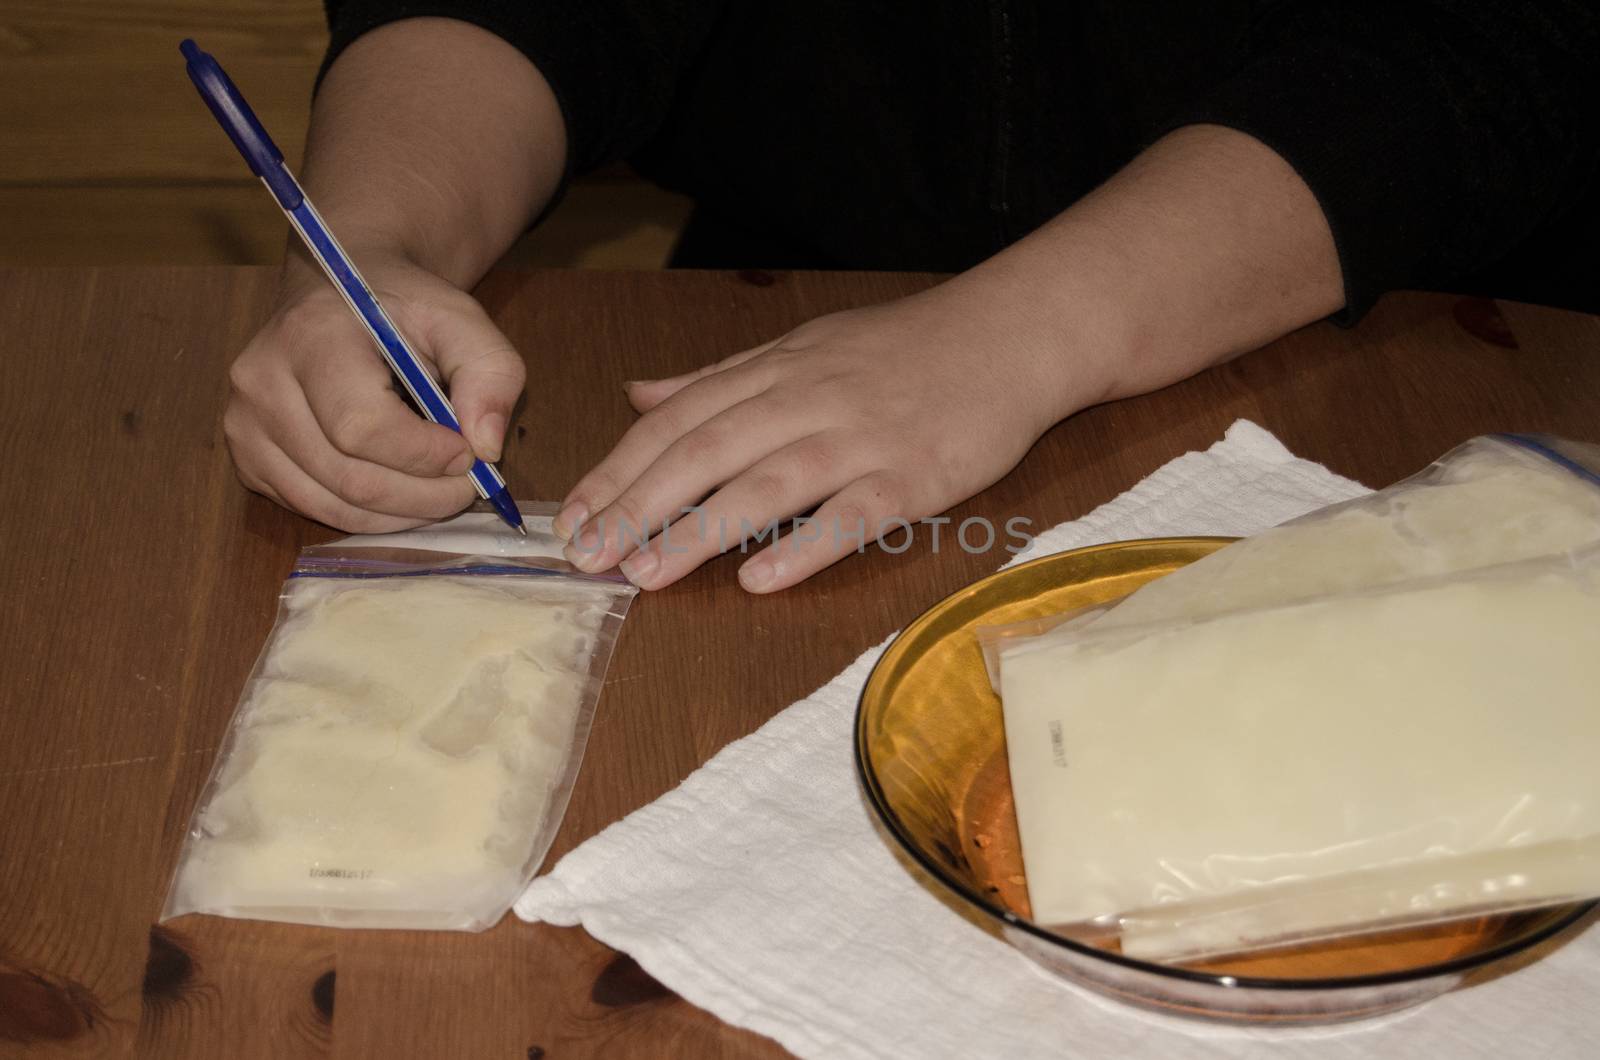 mother packing frozen breast milk in bag for further storage in freezer writing a date when milk was expresed by negmardesign